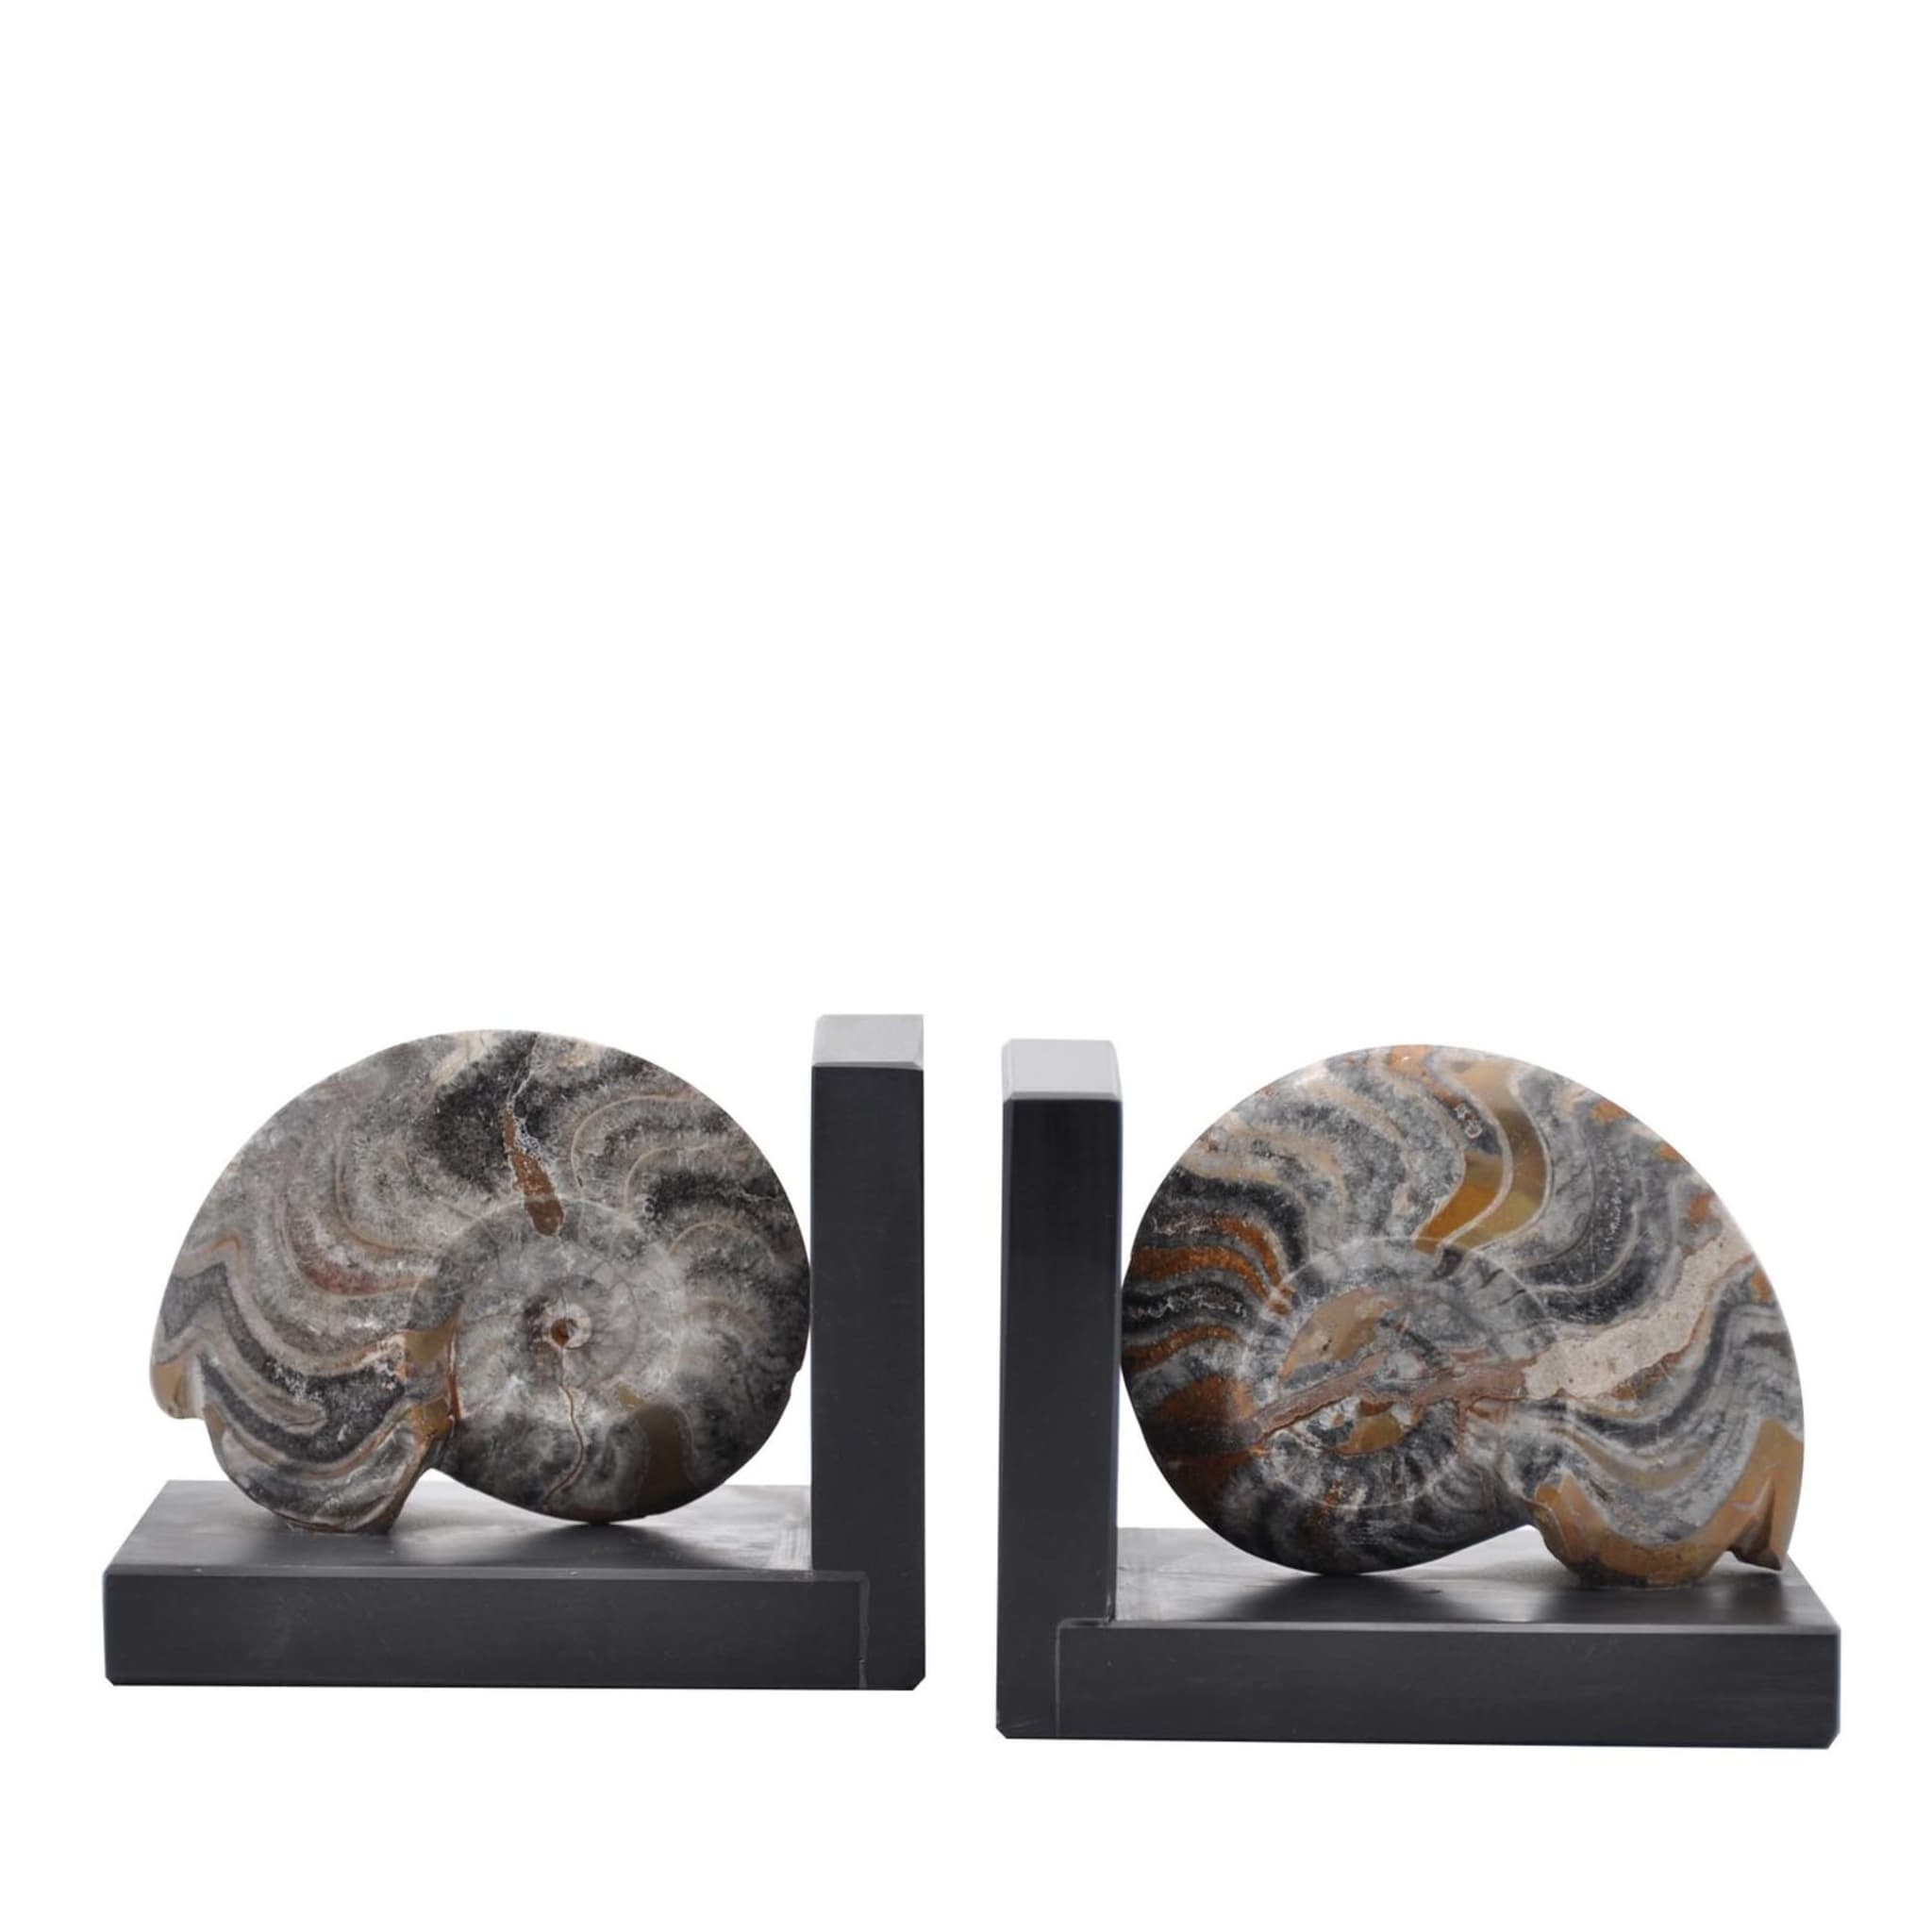 Fossiline Bookends sculpture #3 by Nino Basso - Main view